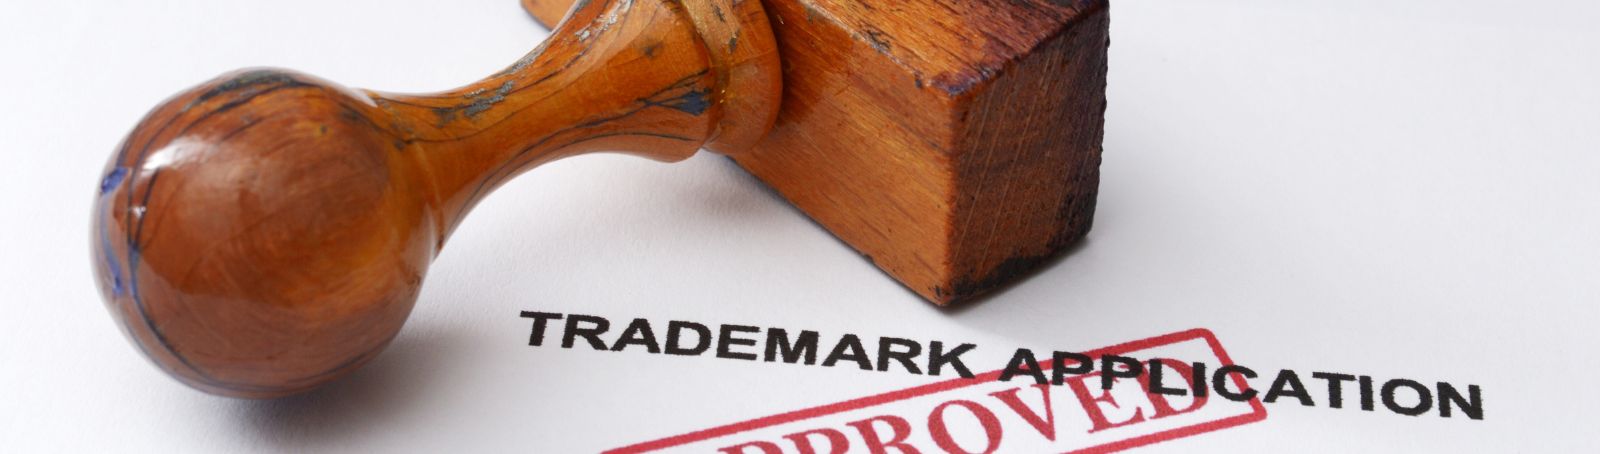 Trademark Protection in Thailand